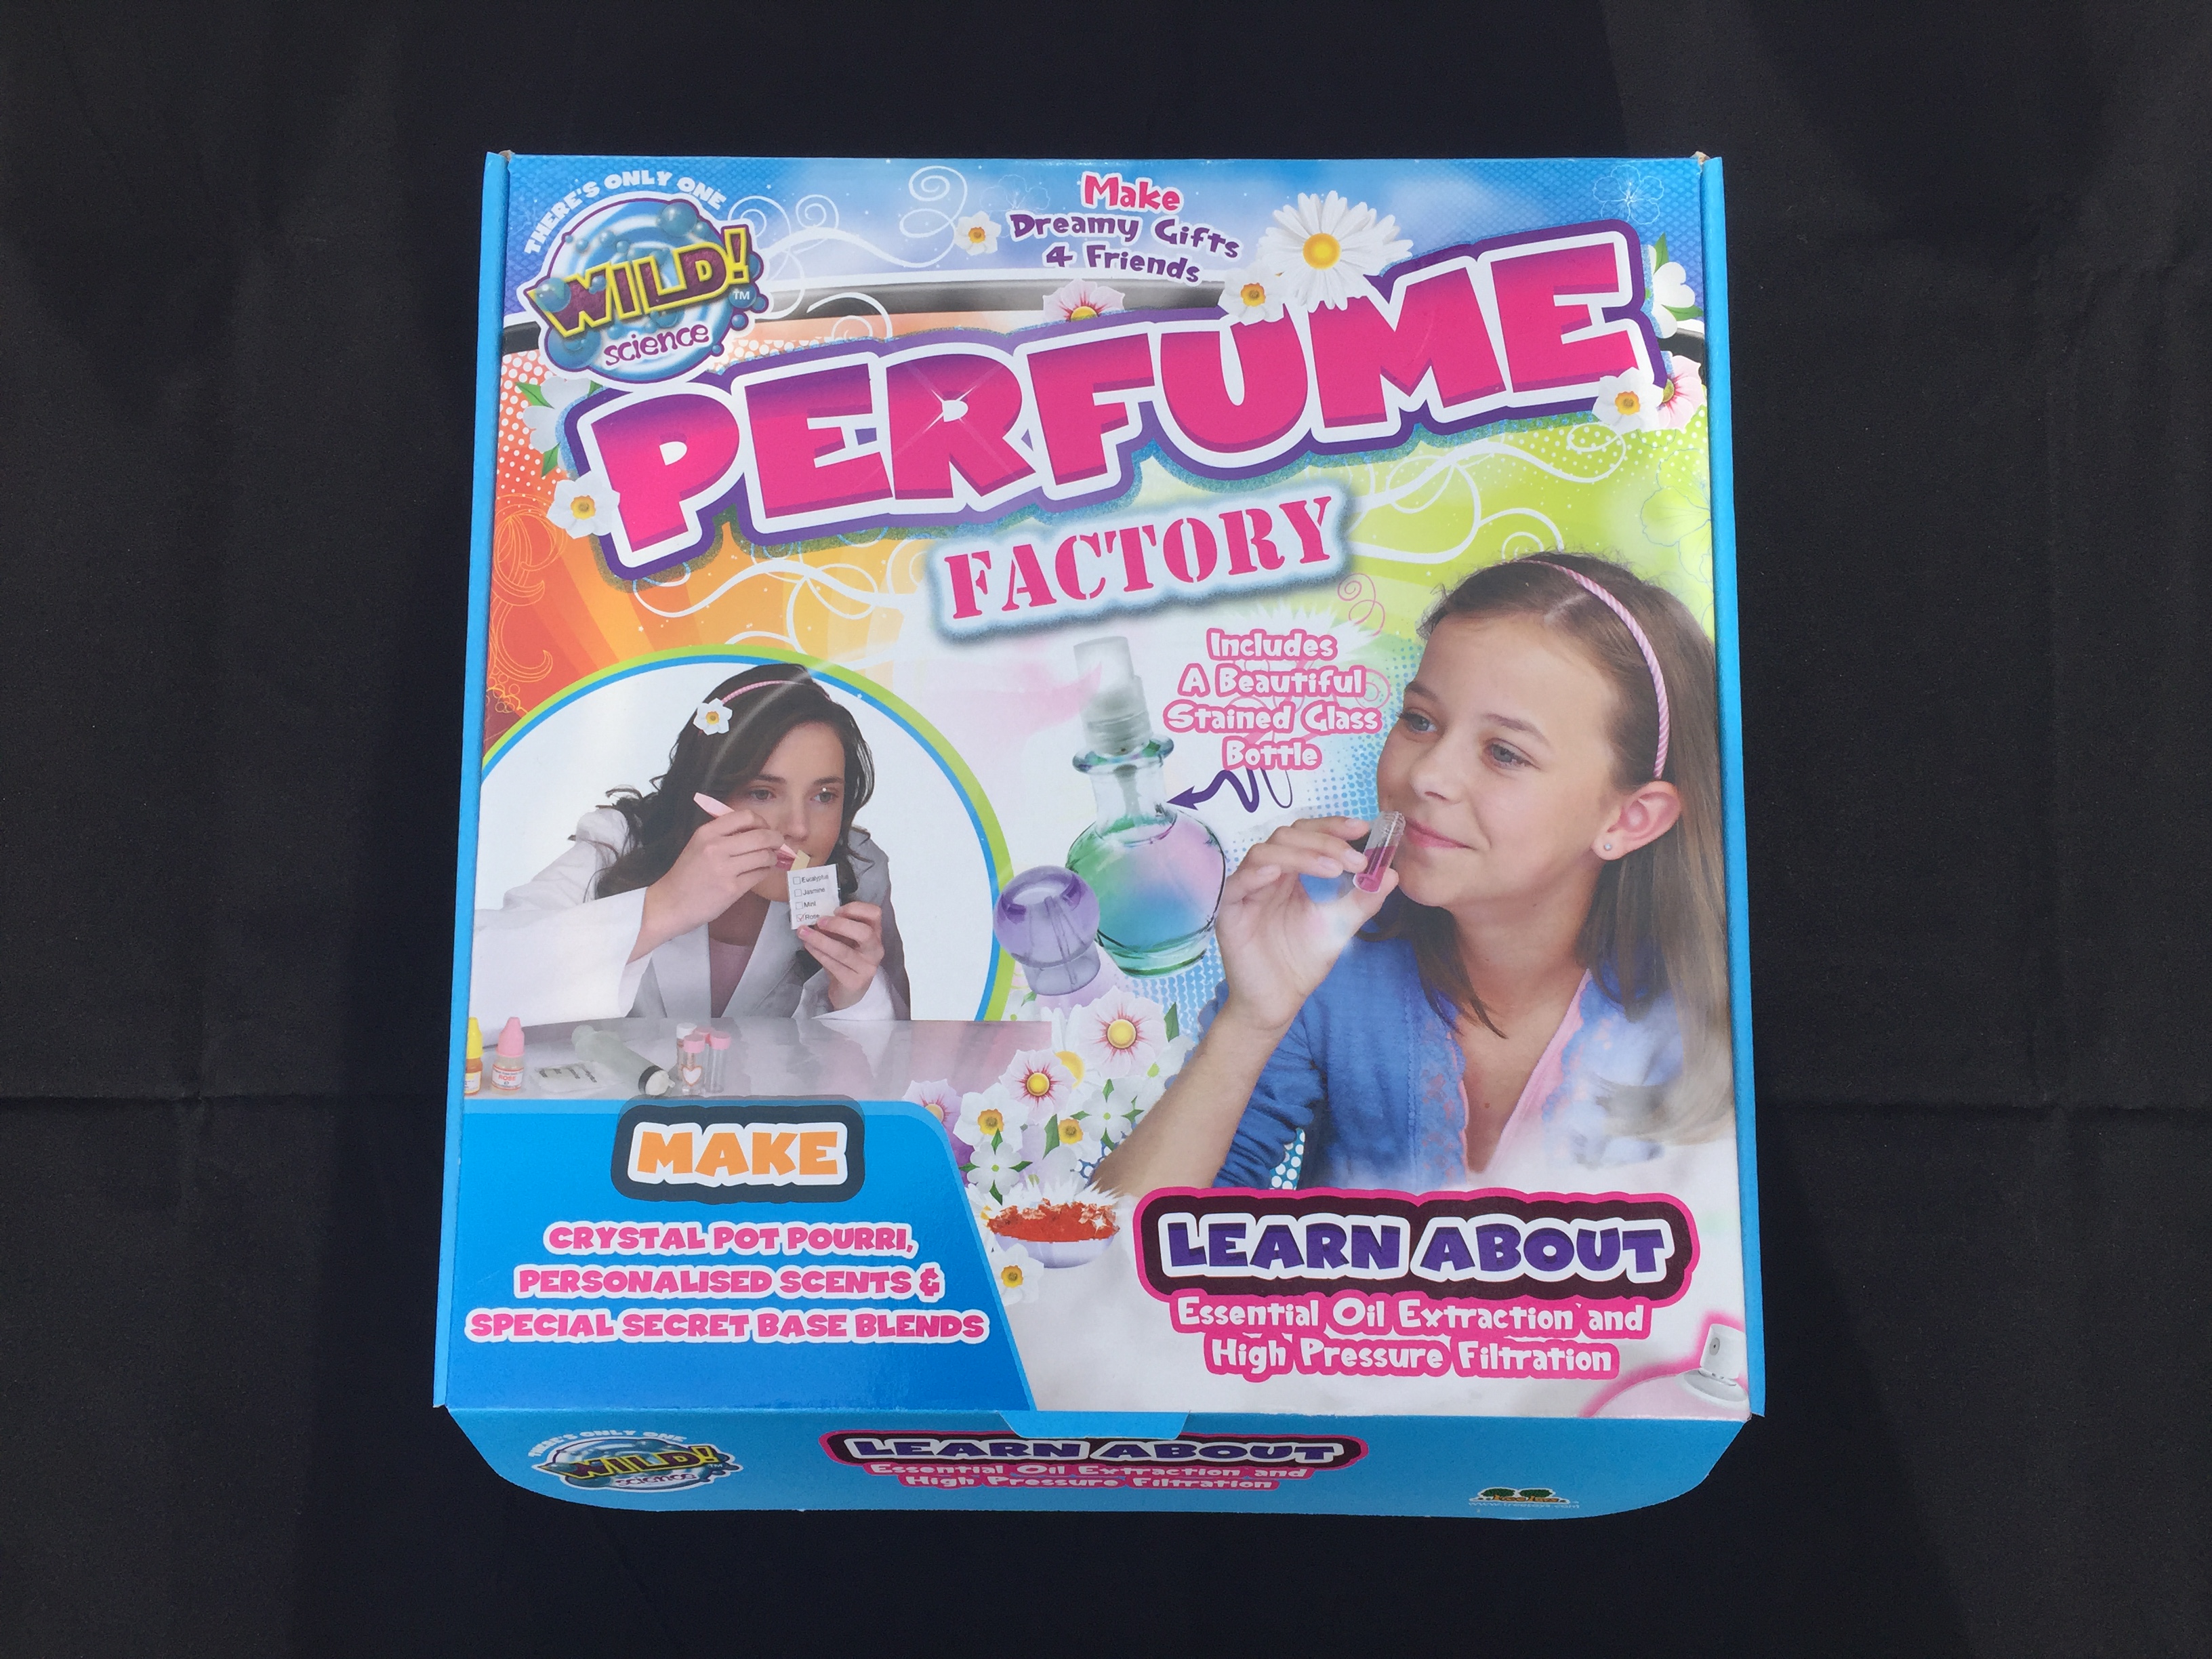 Review: Wild Science Perfume Factory